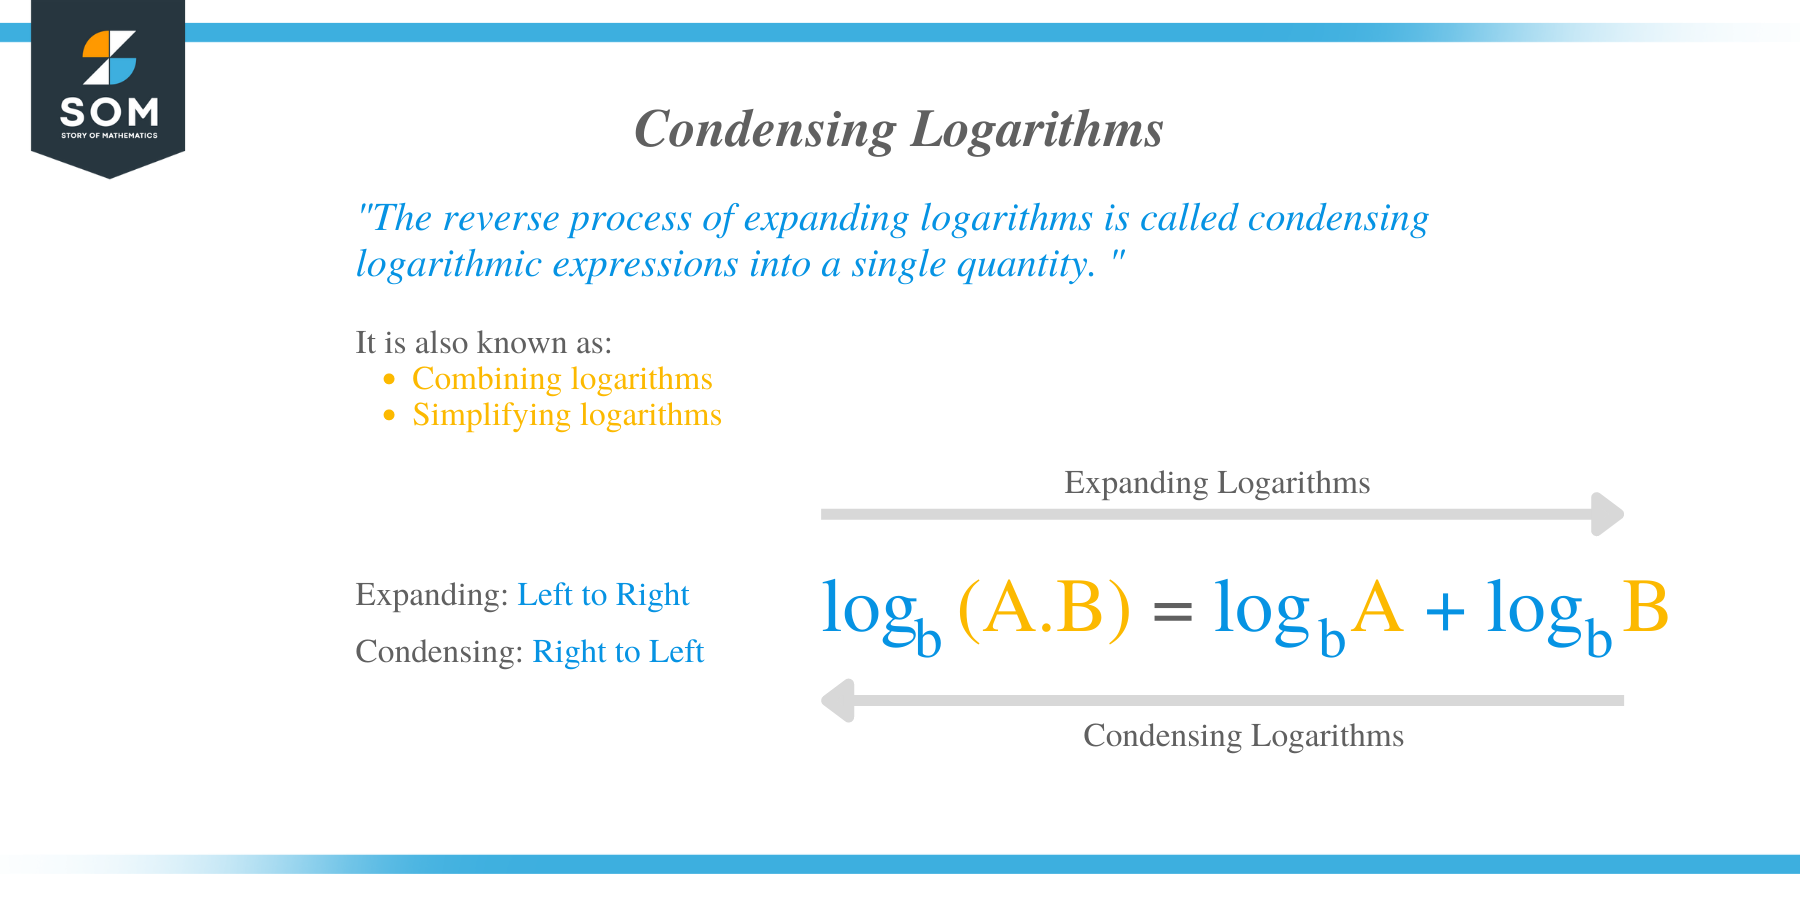 How to condense logarithms? 